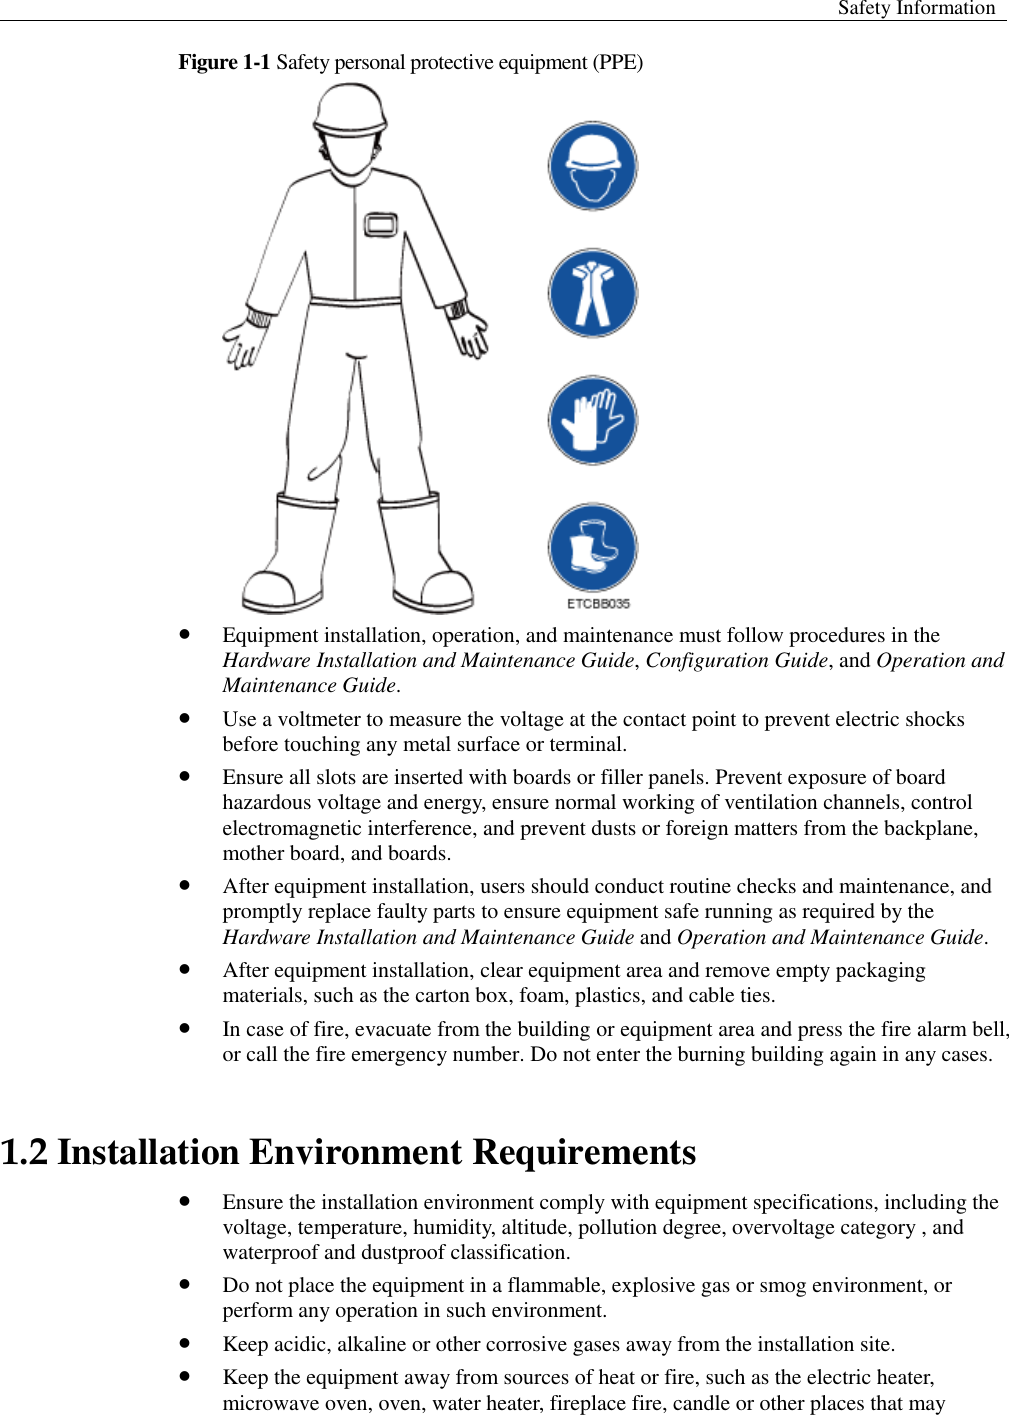  Safety Information  Figure 1-1 Safety personal protective equipment (PPE)   Equipment installation, operation, and maintenance must follow procedures in the Hardware Installation and Maintenance Guide, Configuration Guide, and Operation and Maintenance Guide.  Use a voltmeter to measure the voltage at the contact point to prevent electric shocks before touching any metal surface or terminal.    Ensure all slots are inserted with boards or filler panels. Prevent exposure of board hazardous voltage and energy, ensure normal working of ventilation channels, control electromagnetic interference, and prevent dusts or foreign matters from the backplane, mother board, and boards.    After equipment installation, users should conduct routine checks and maintenance, and promptly replace faulty parts to ensure equipment safe running as required by the Hardware Installation and Maintenance Guide and Operation and Maintenance Guide.    After equipment installation, clear equipment area and remove empty packaging materials, such as the carton box, foam, plastics, and cable ties.  In case of fire, evacuate from the building or equipment area and press the fire alarm bell, or call the fire emergency number. Do not enter the burning building again in any cases.   1.2 Installation Environment Requirements  Ensure the installation environment comply with equipment specifications, including the voltage, temperature, humidity, altitude, pollution degree, overvoltage category , and waterproof and dustproof classification.  Do not place the equipment in a flammable, explosive gas or smog environment, or perform any operation in such environment.  Keep acidic, alkaline or other corrosive gases away from the installation site.    Keep the equipment away from sources of heat or fire, such as the electric heater, microwave oven, oven, water heater, fireplace fire, candle or other places that may 